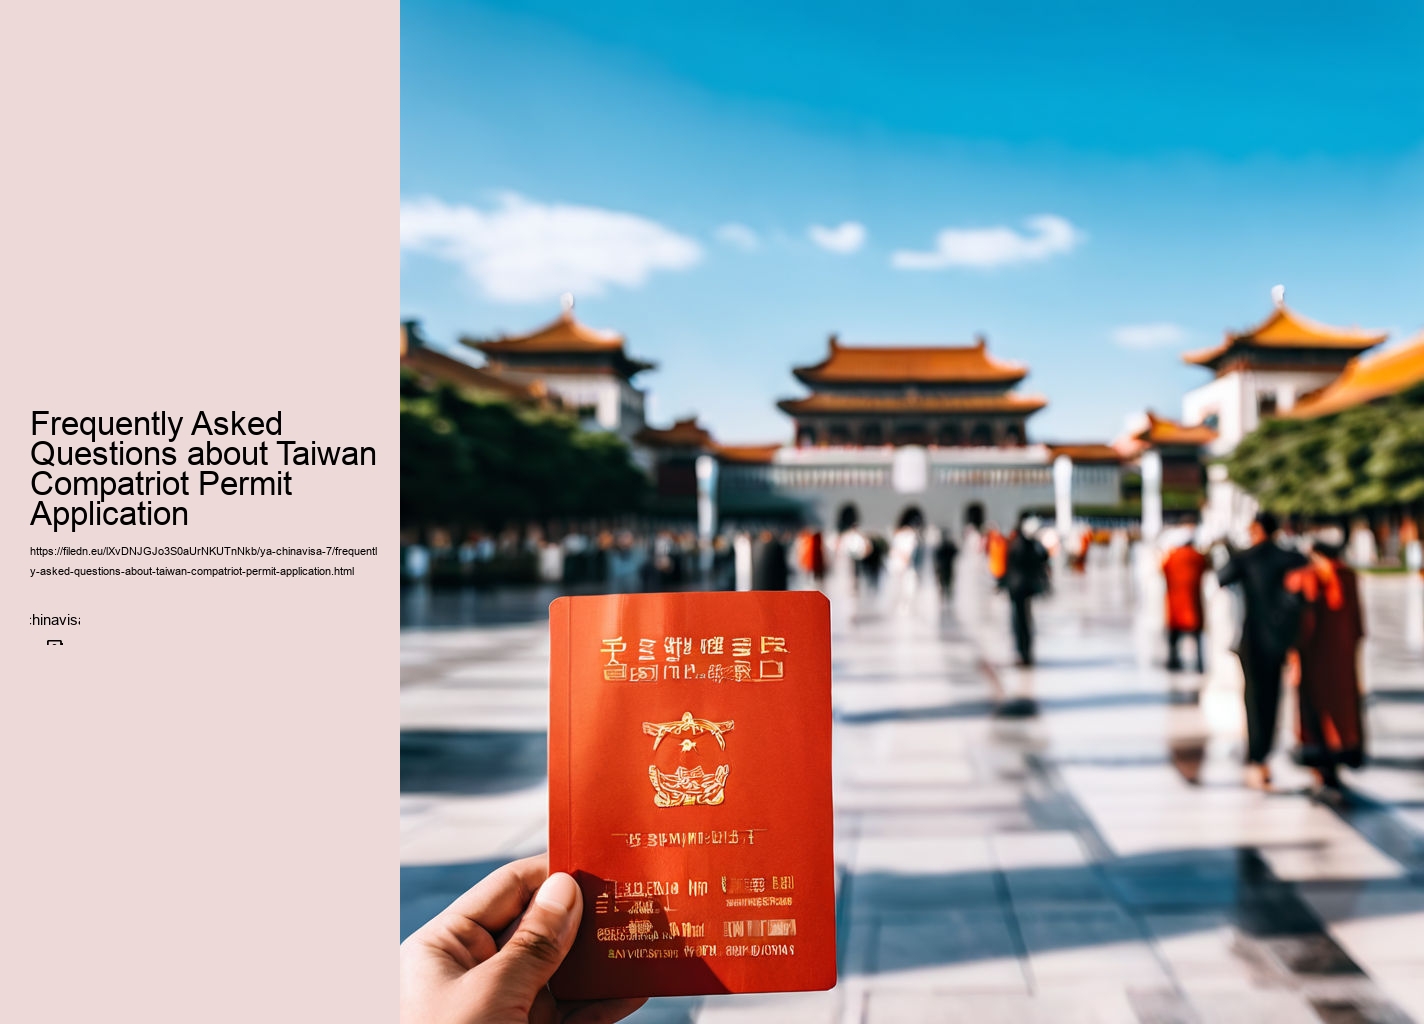 Frequently Asked Questions about Taiwan Compatriot Permit Application